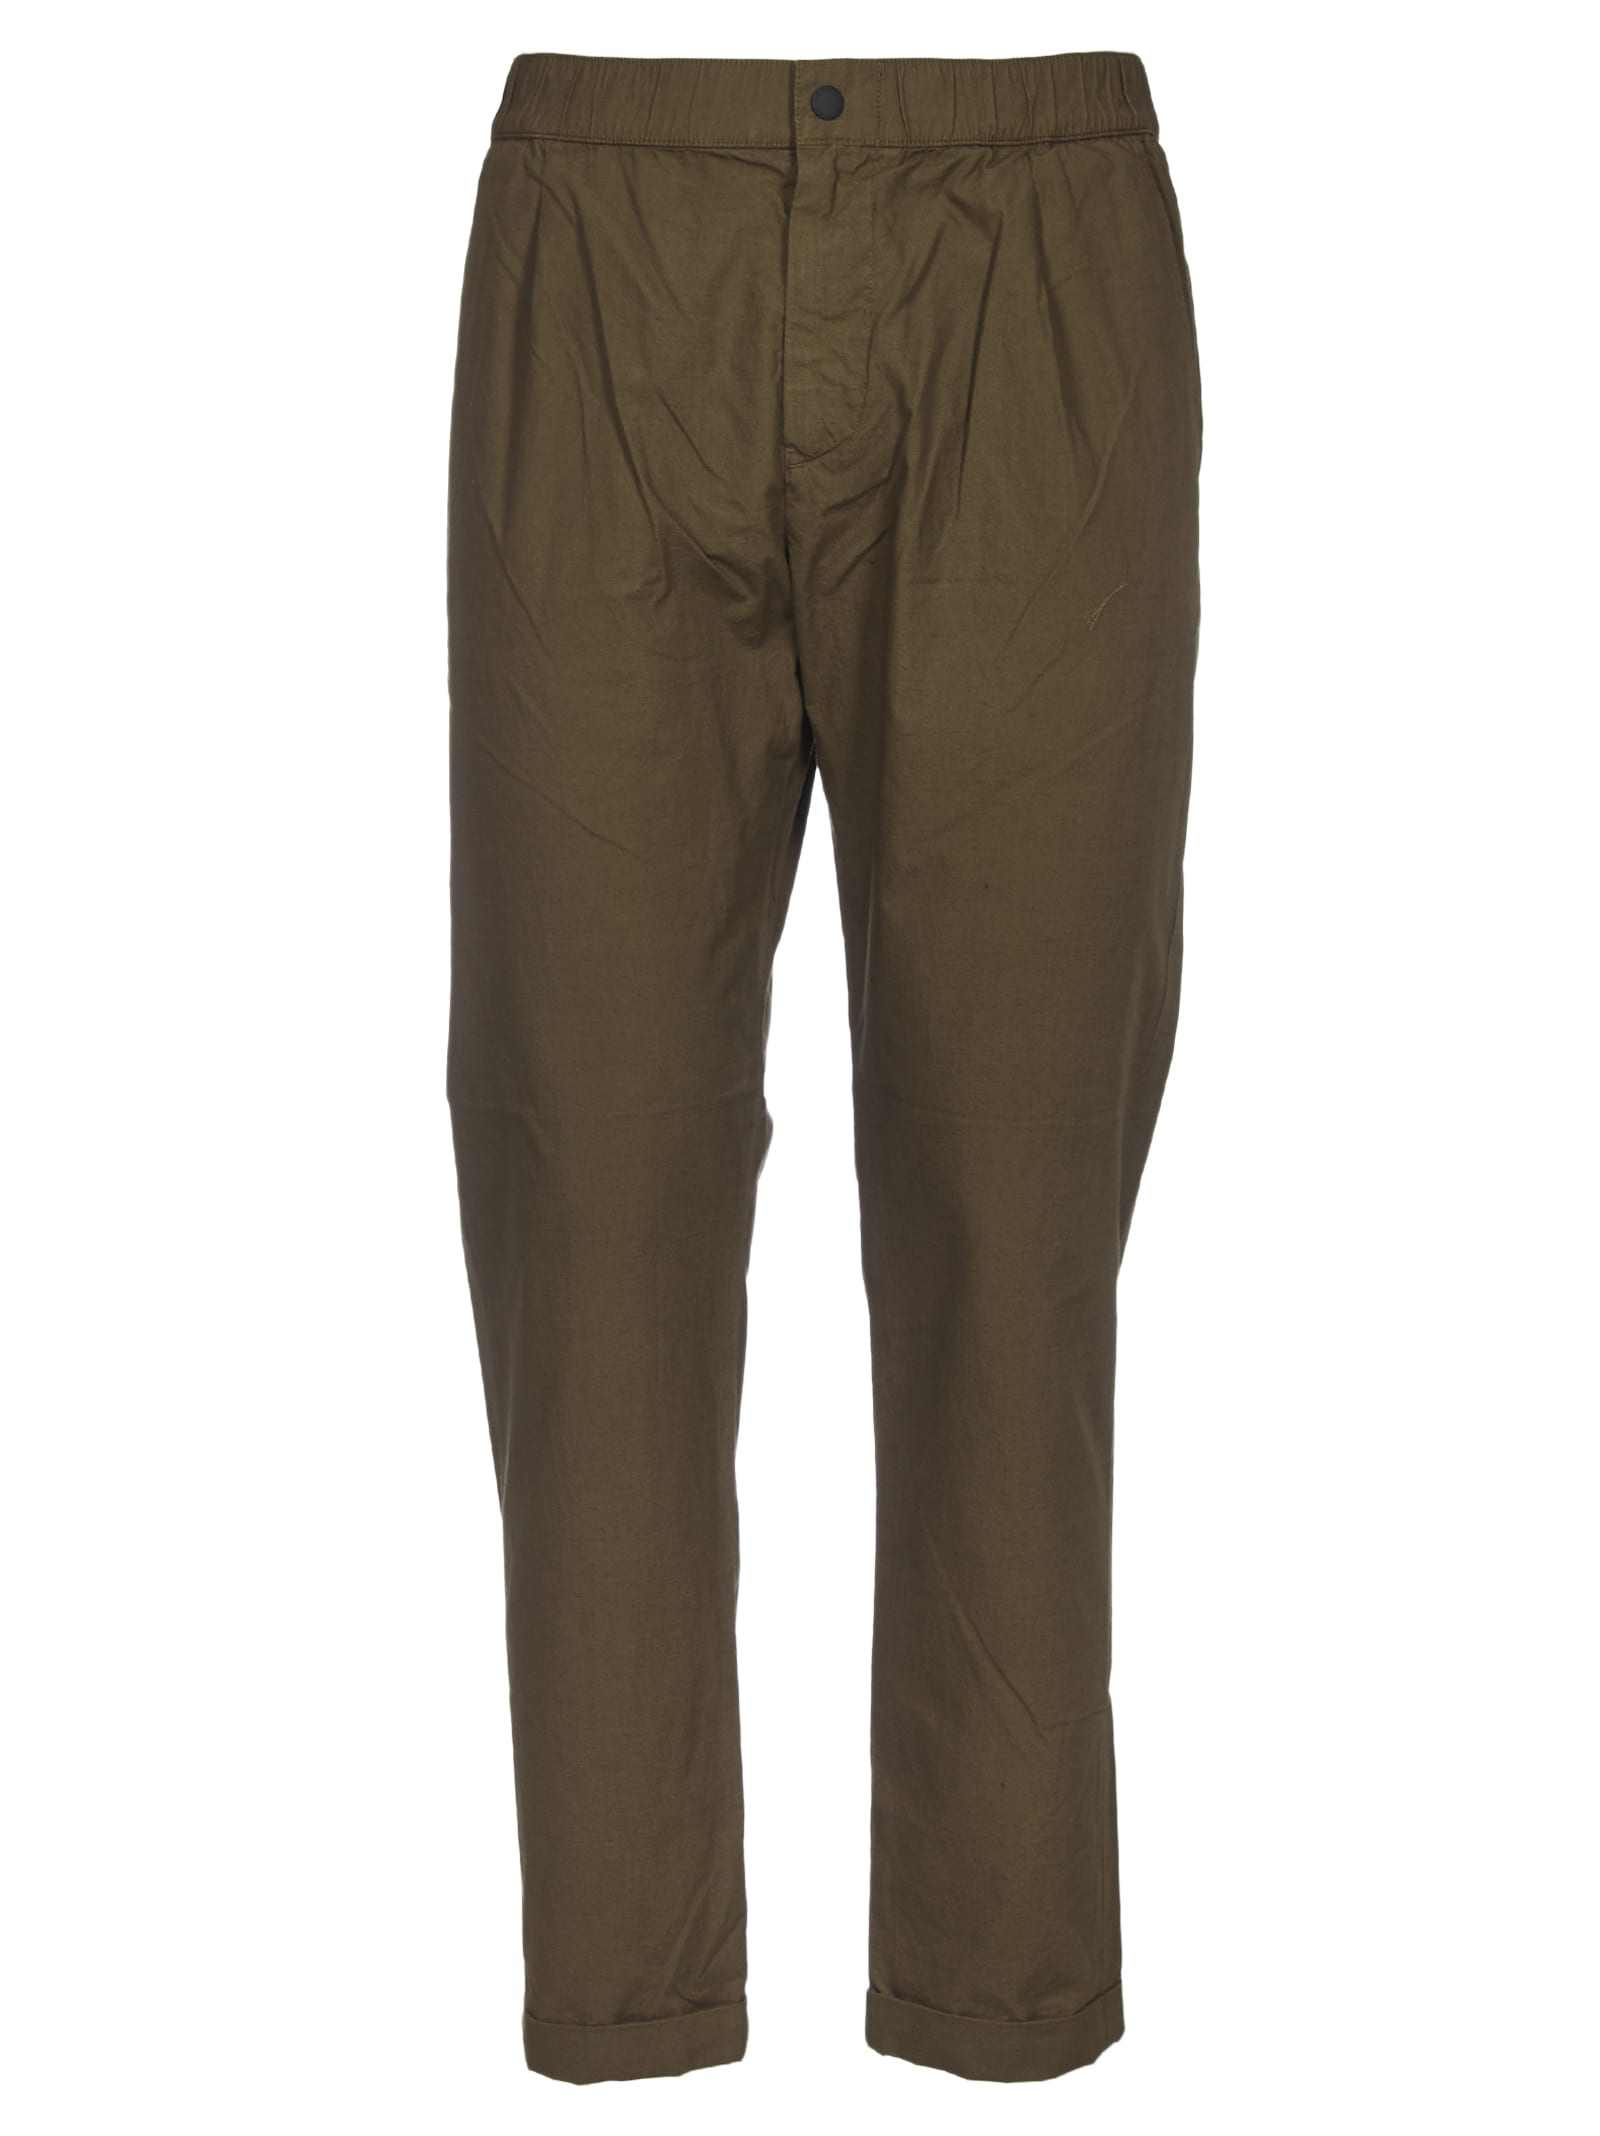 Paul Smith Ps By Paul Smith Elasticated Waist Chino Trousers - Green